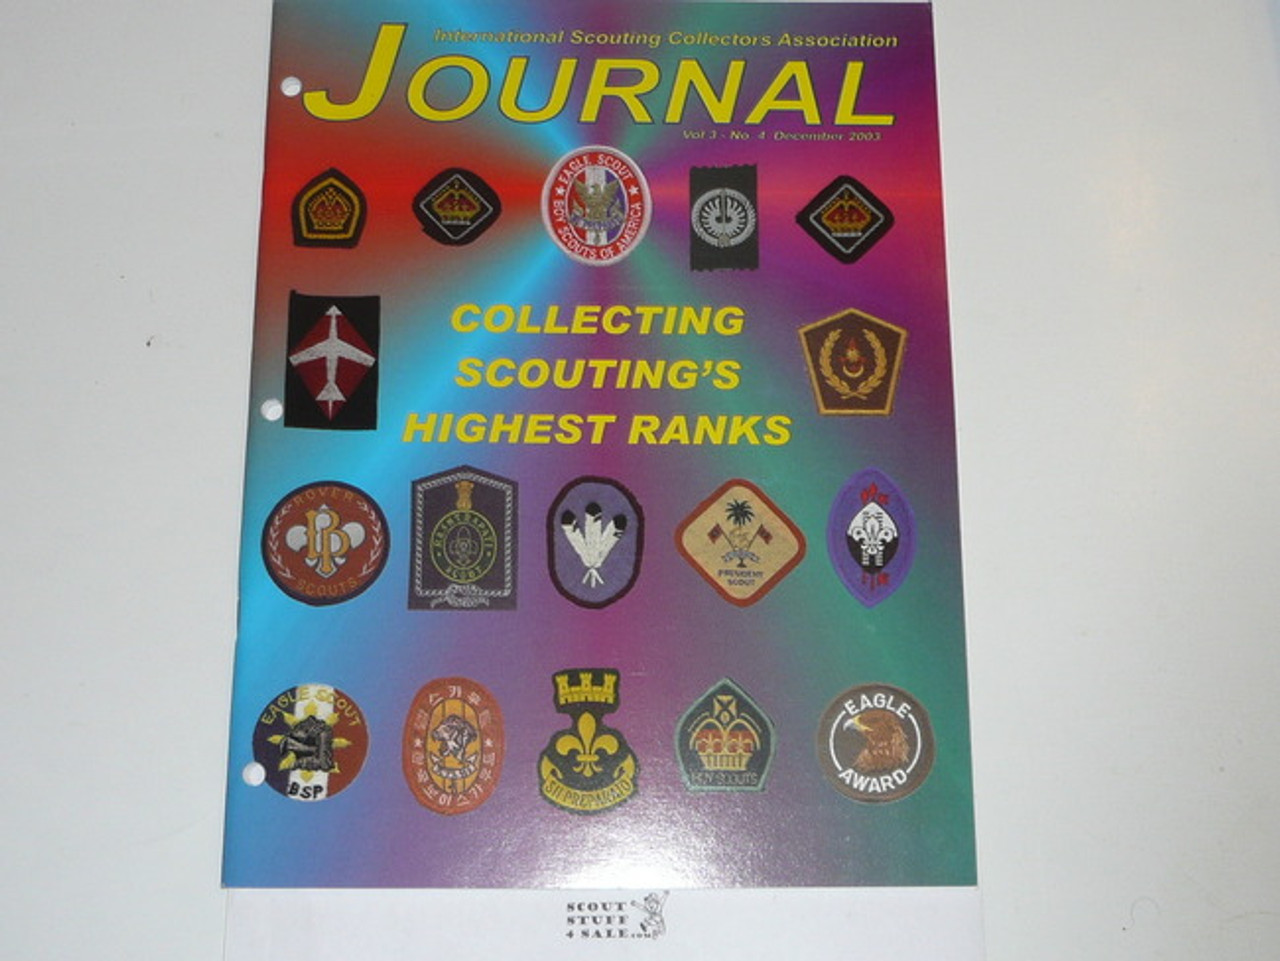 The International Scouting Collectors Association (ISCA) Journal, 2003 December, Vol 3 #4